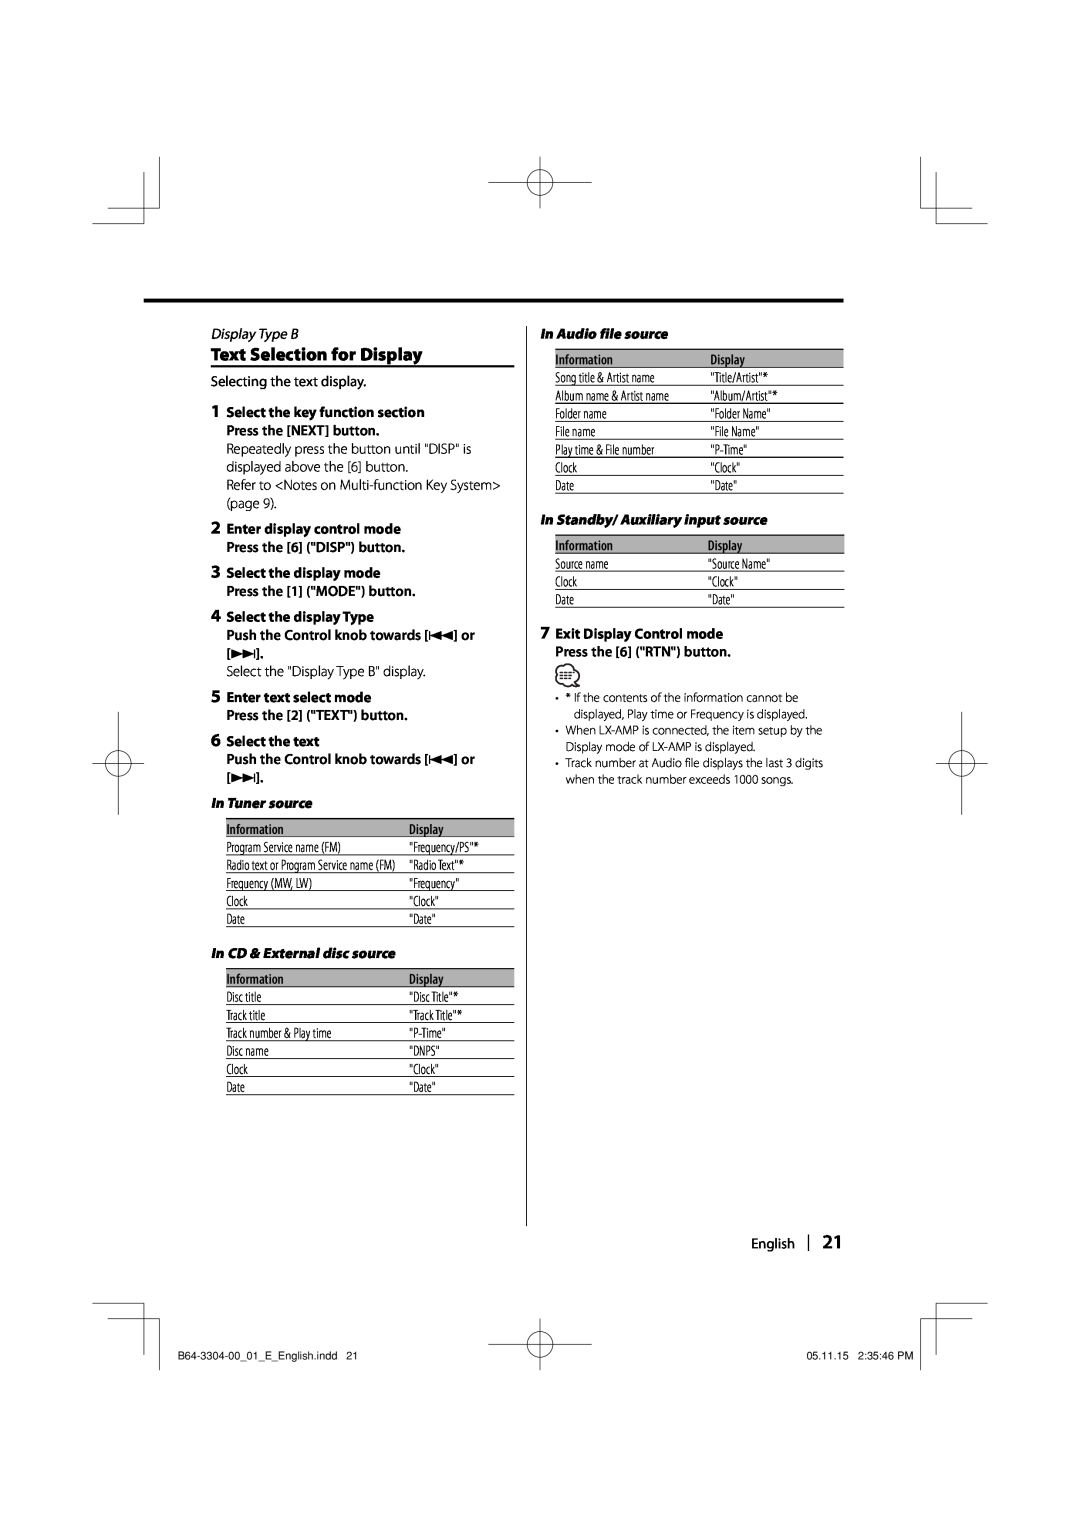 Dolby Laboratories KDC-W8534 instruction manual Text Selection for Display, Display Type B, In Tuner source, Information 